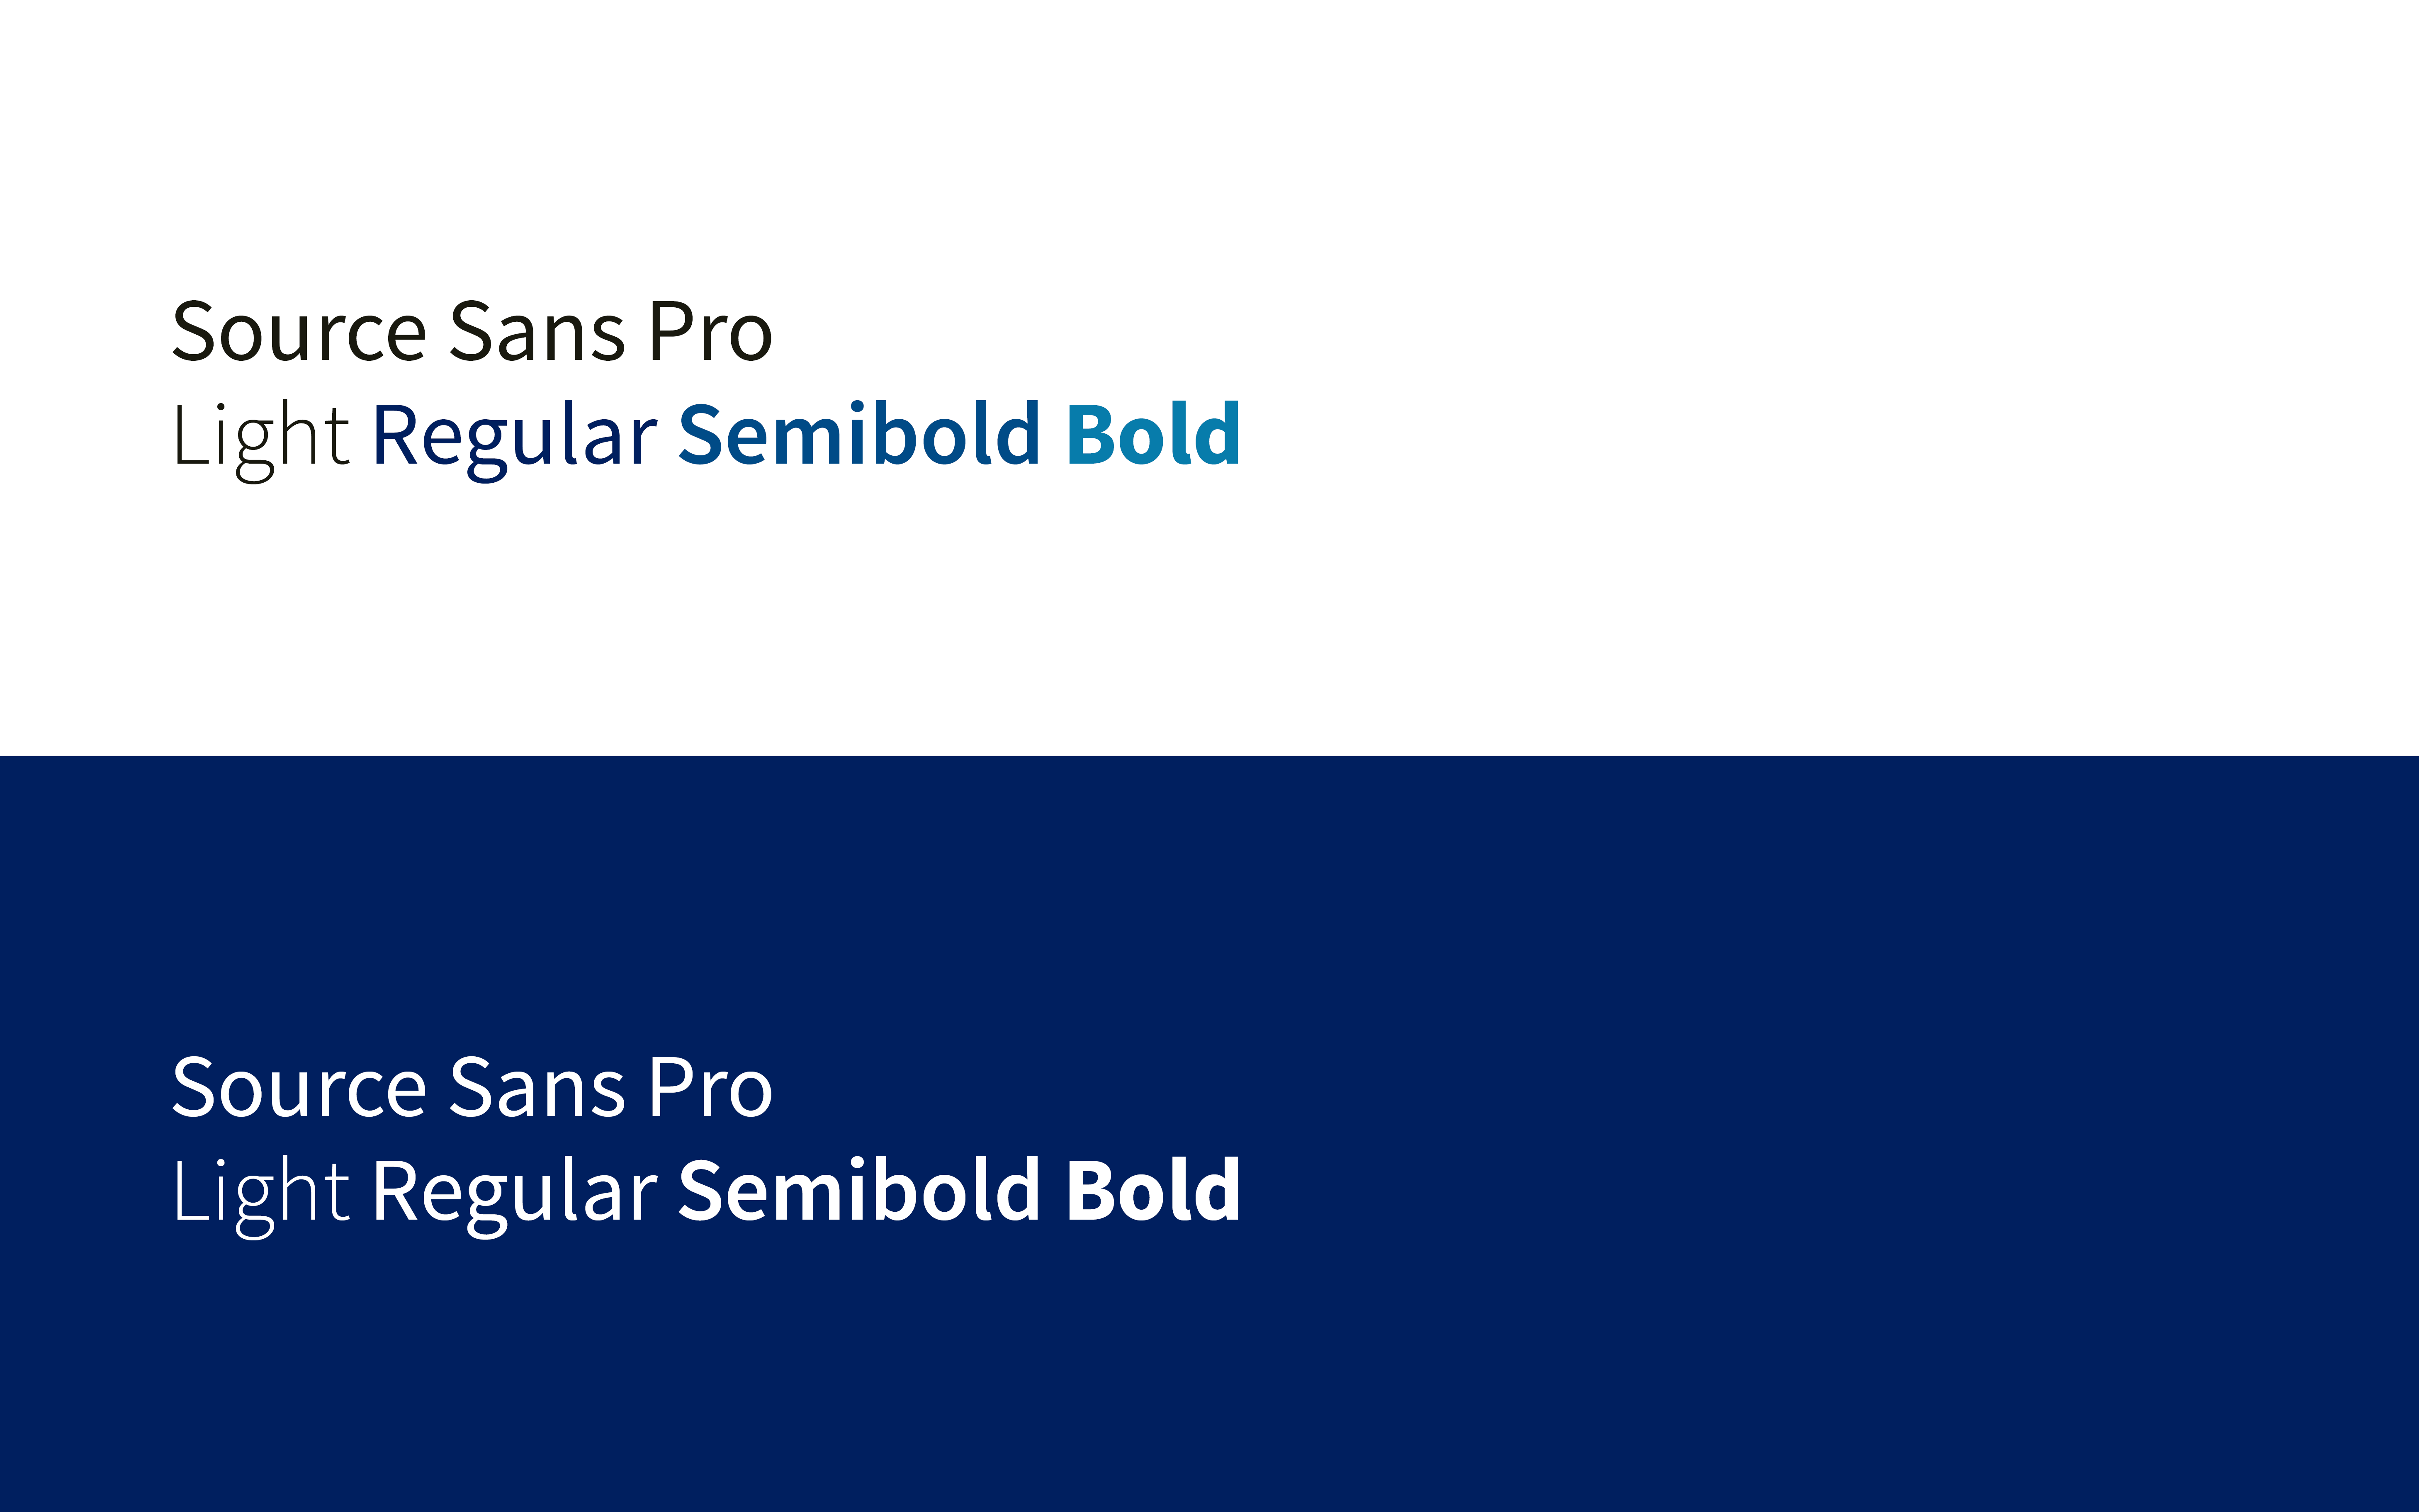 Light, Regular, Semibold, and Bold weights of Source Sans Pro, a tall humanist sans-serif font, on white and dark backgrounds